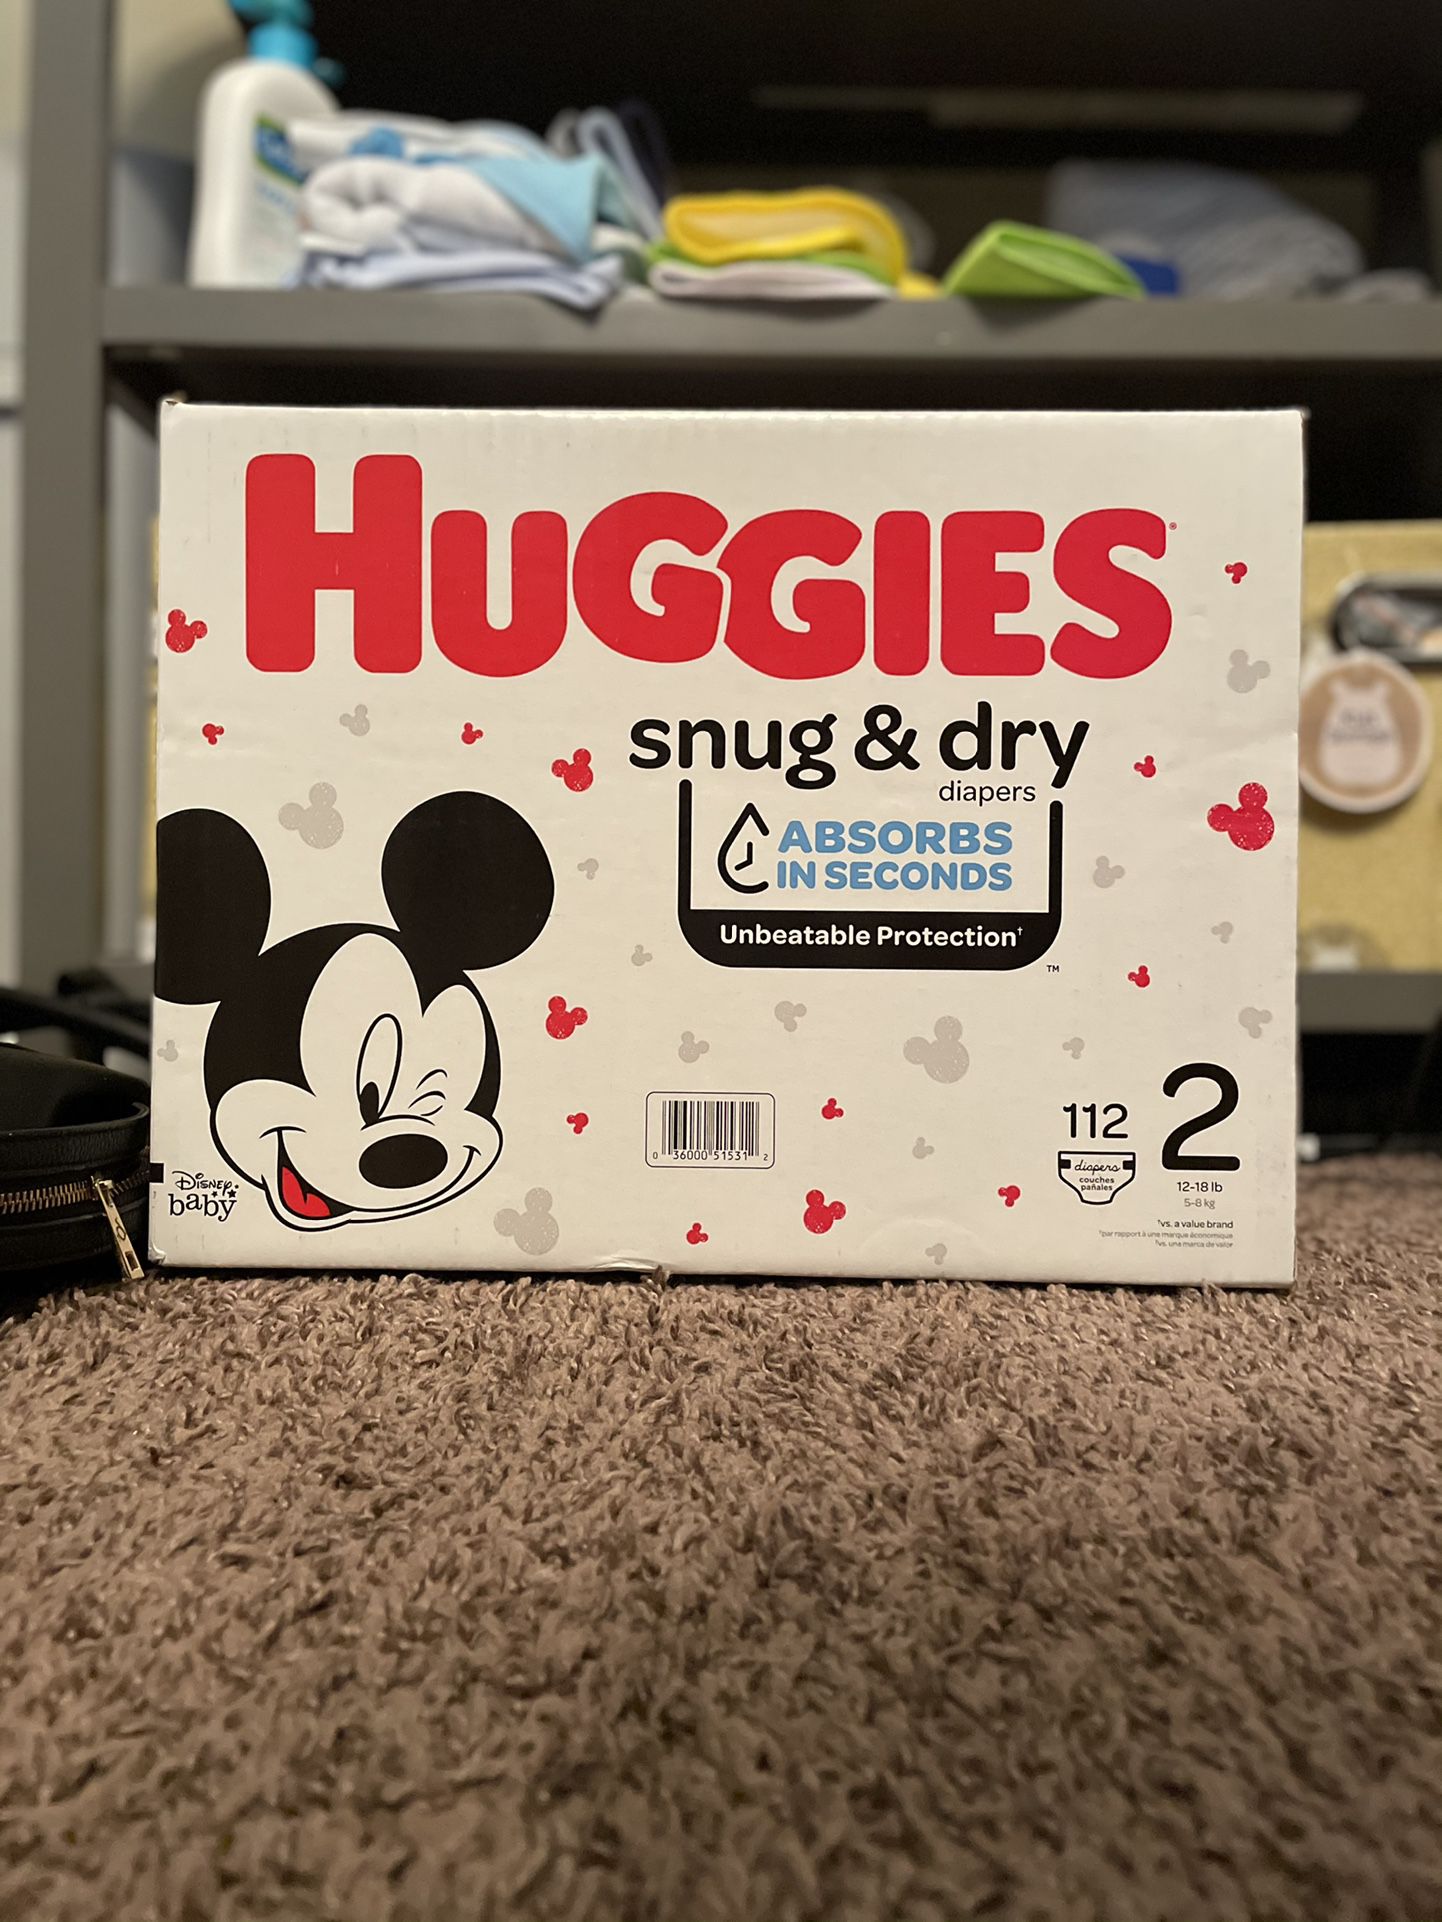 Huggies snug & dry diapers (56) Sz 2**Serious Inquiries Only**